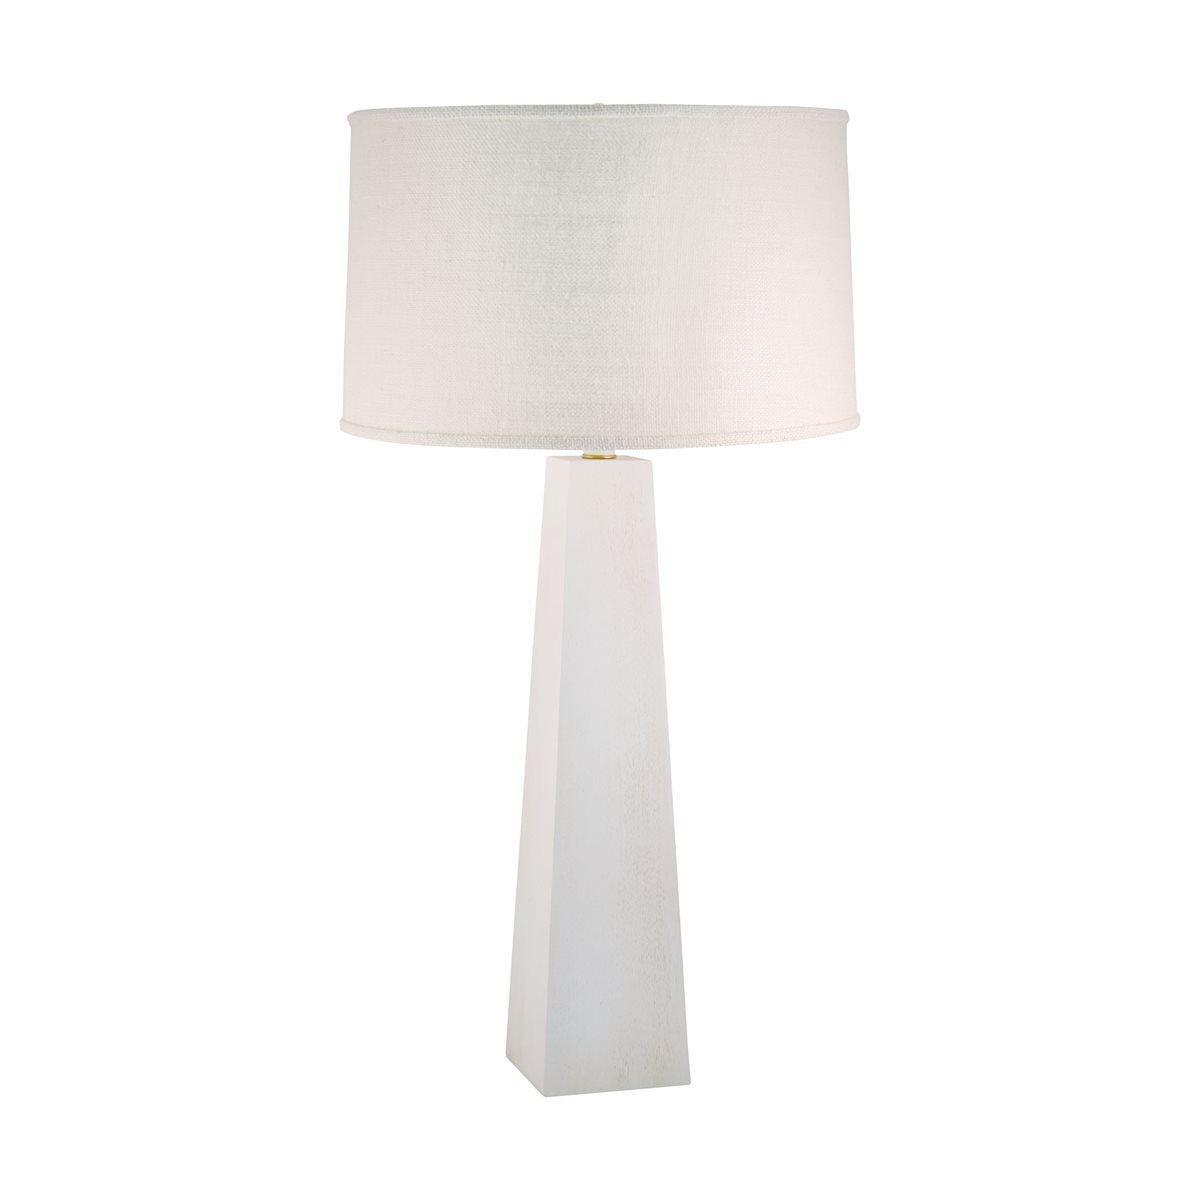 Lovecup Windmill Table Lamp